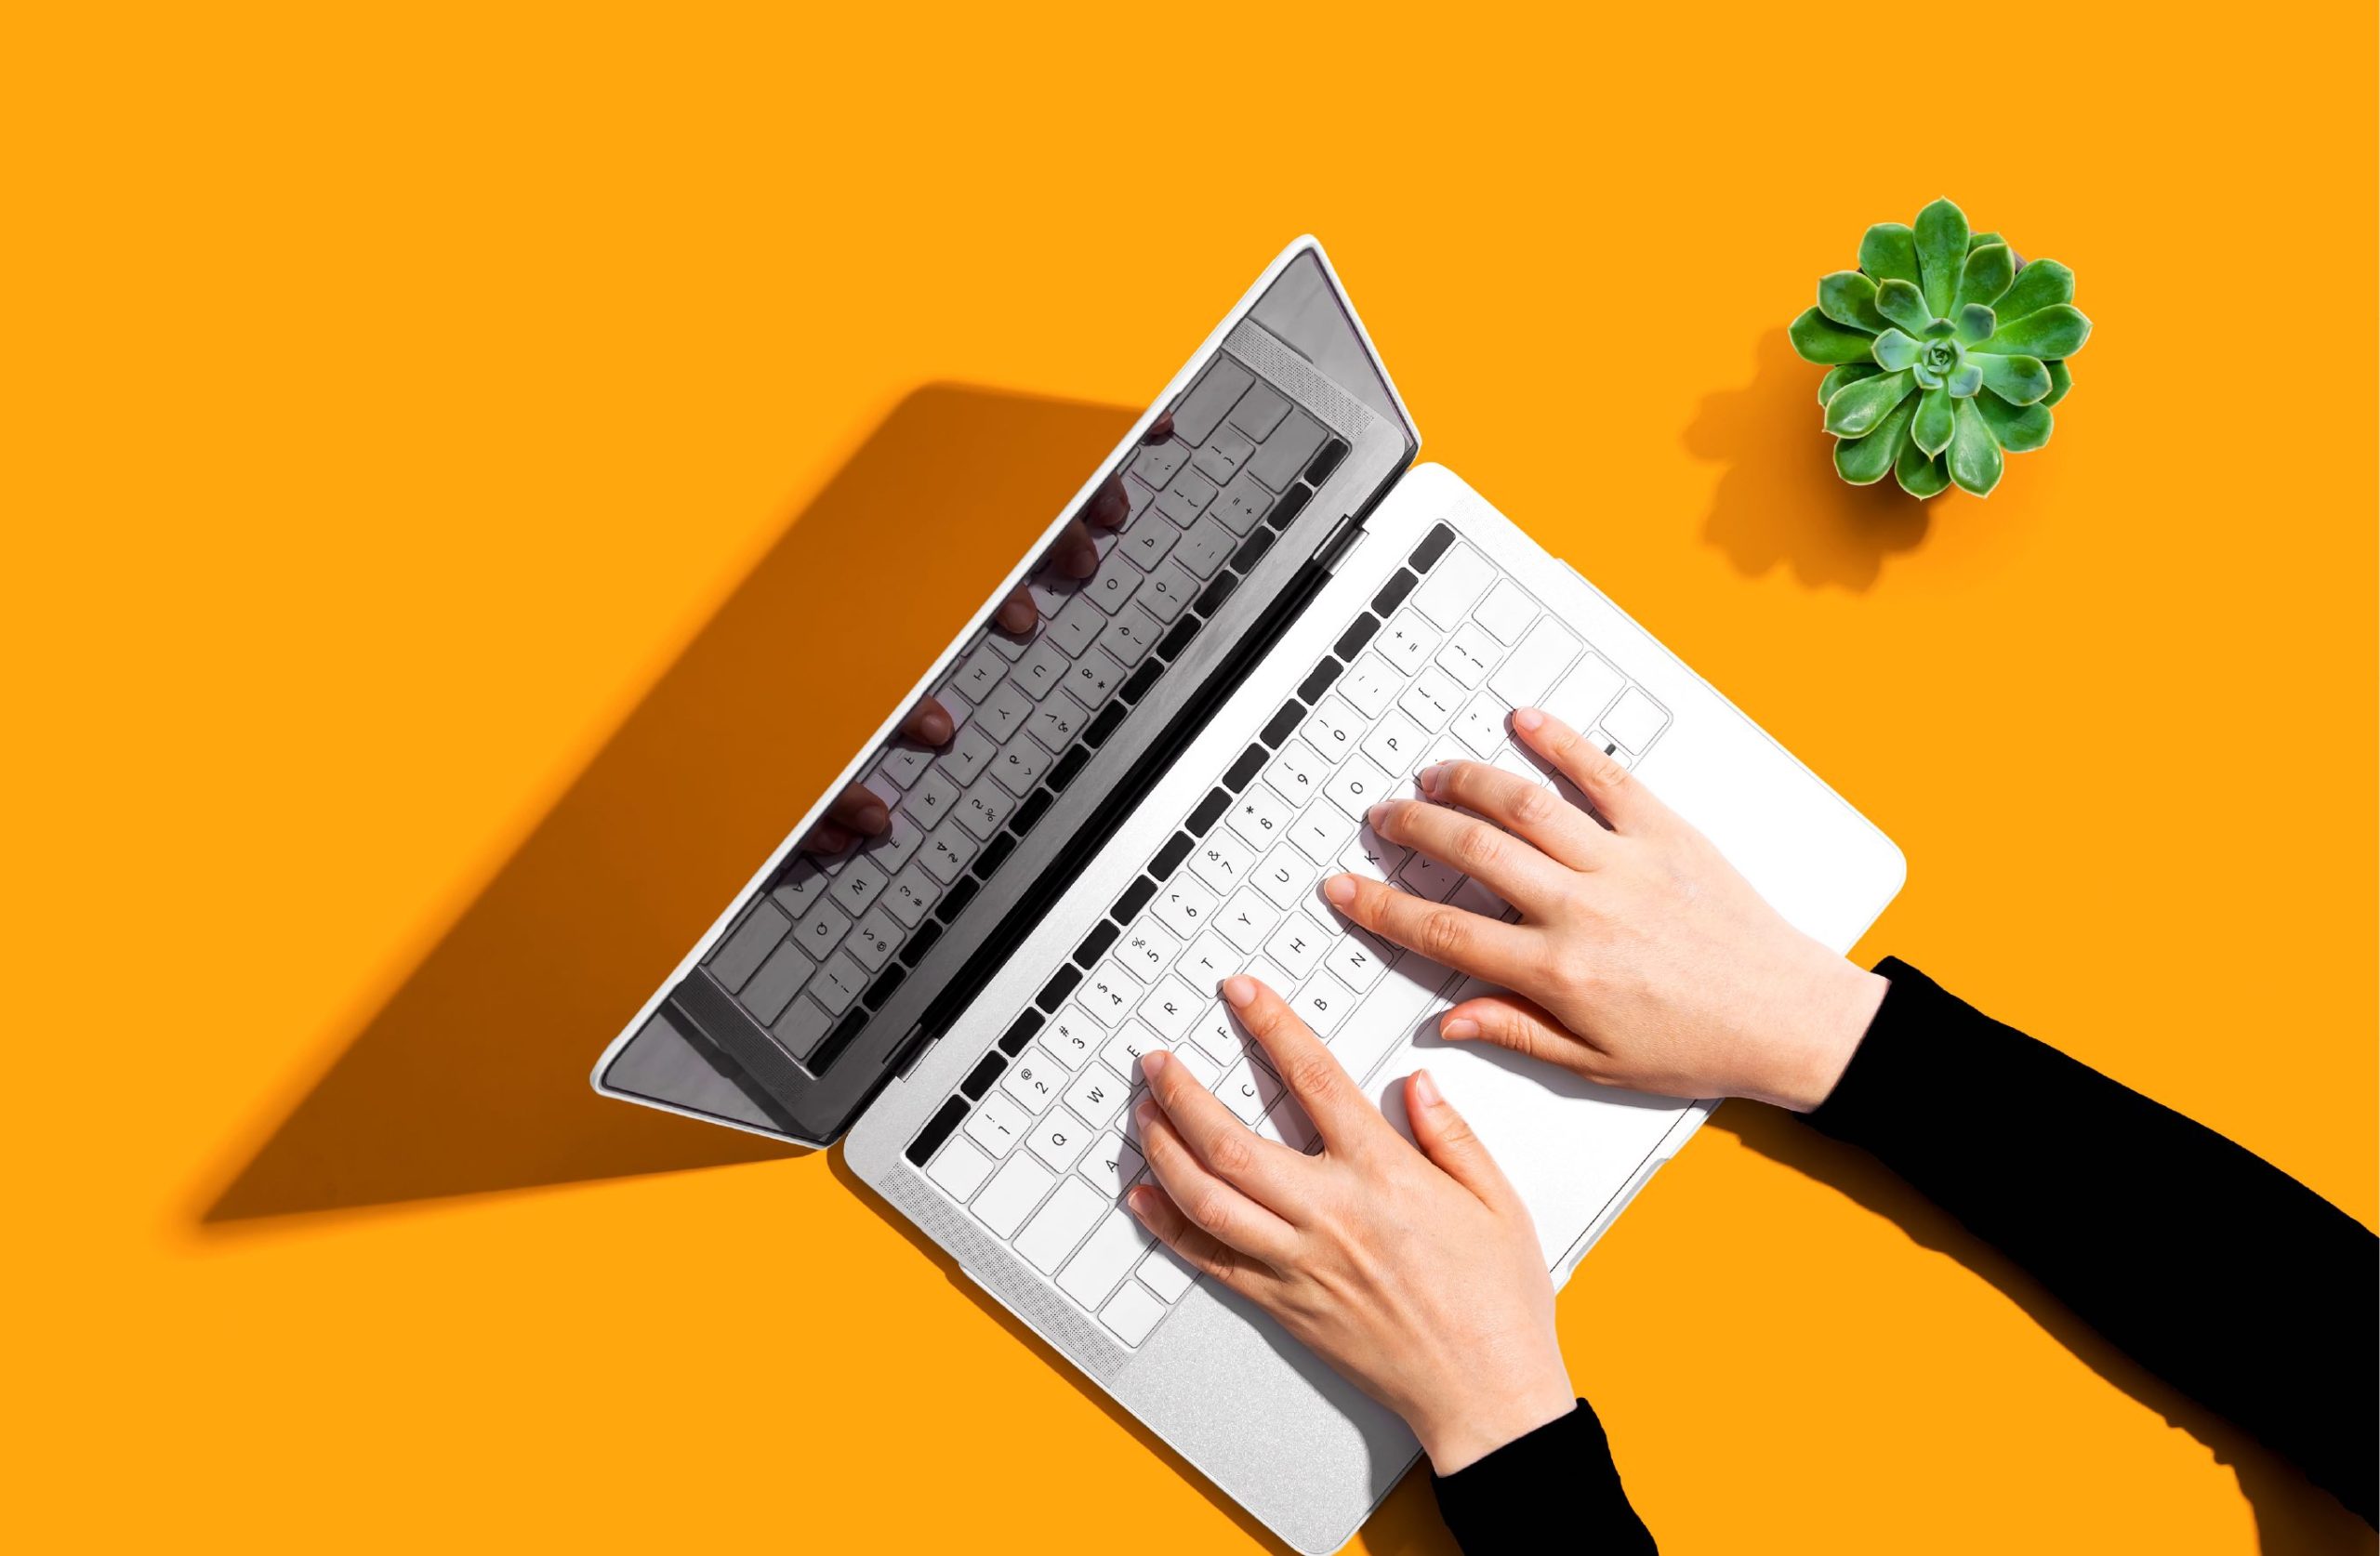 image of two hands typing on a keyboard on an orange table with a small indoor plant next to the laptop